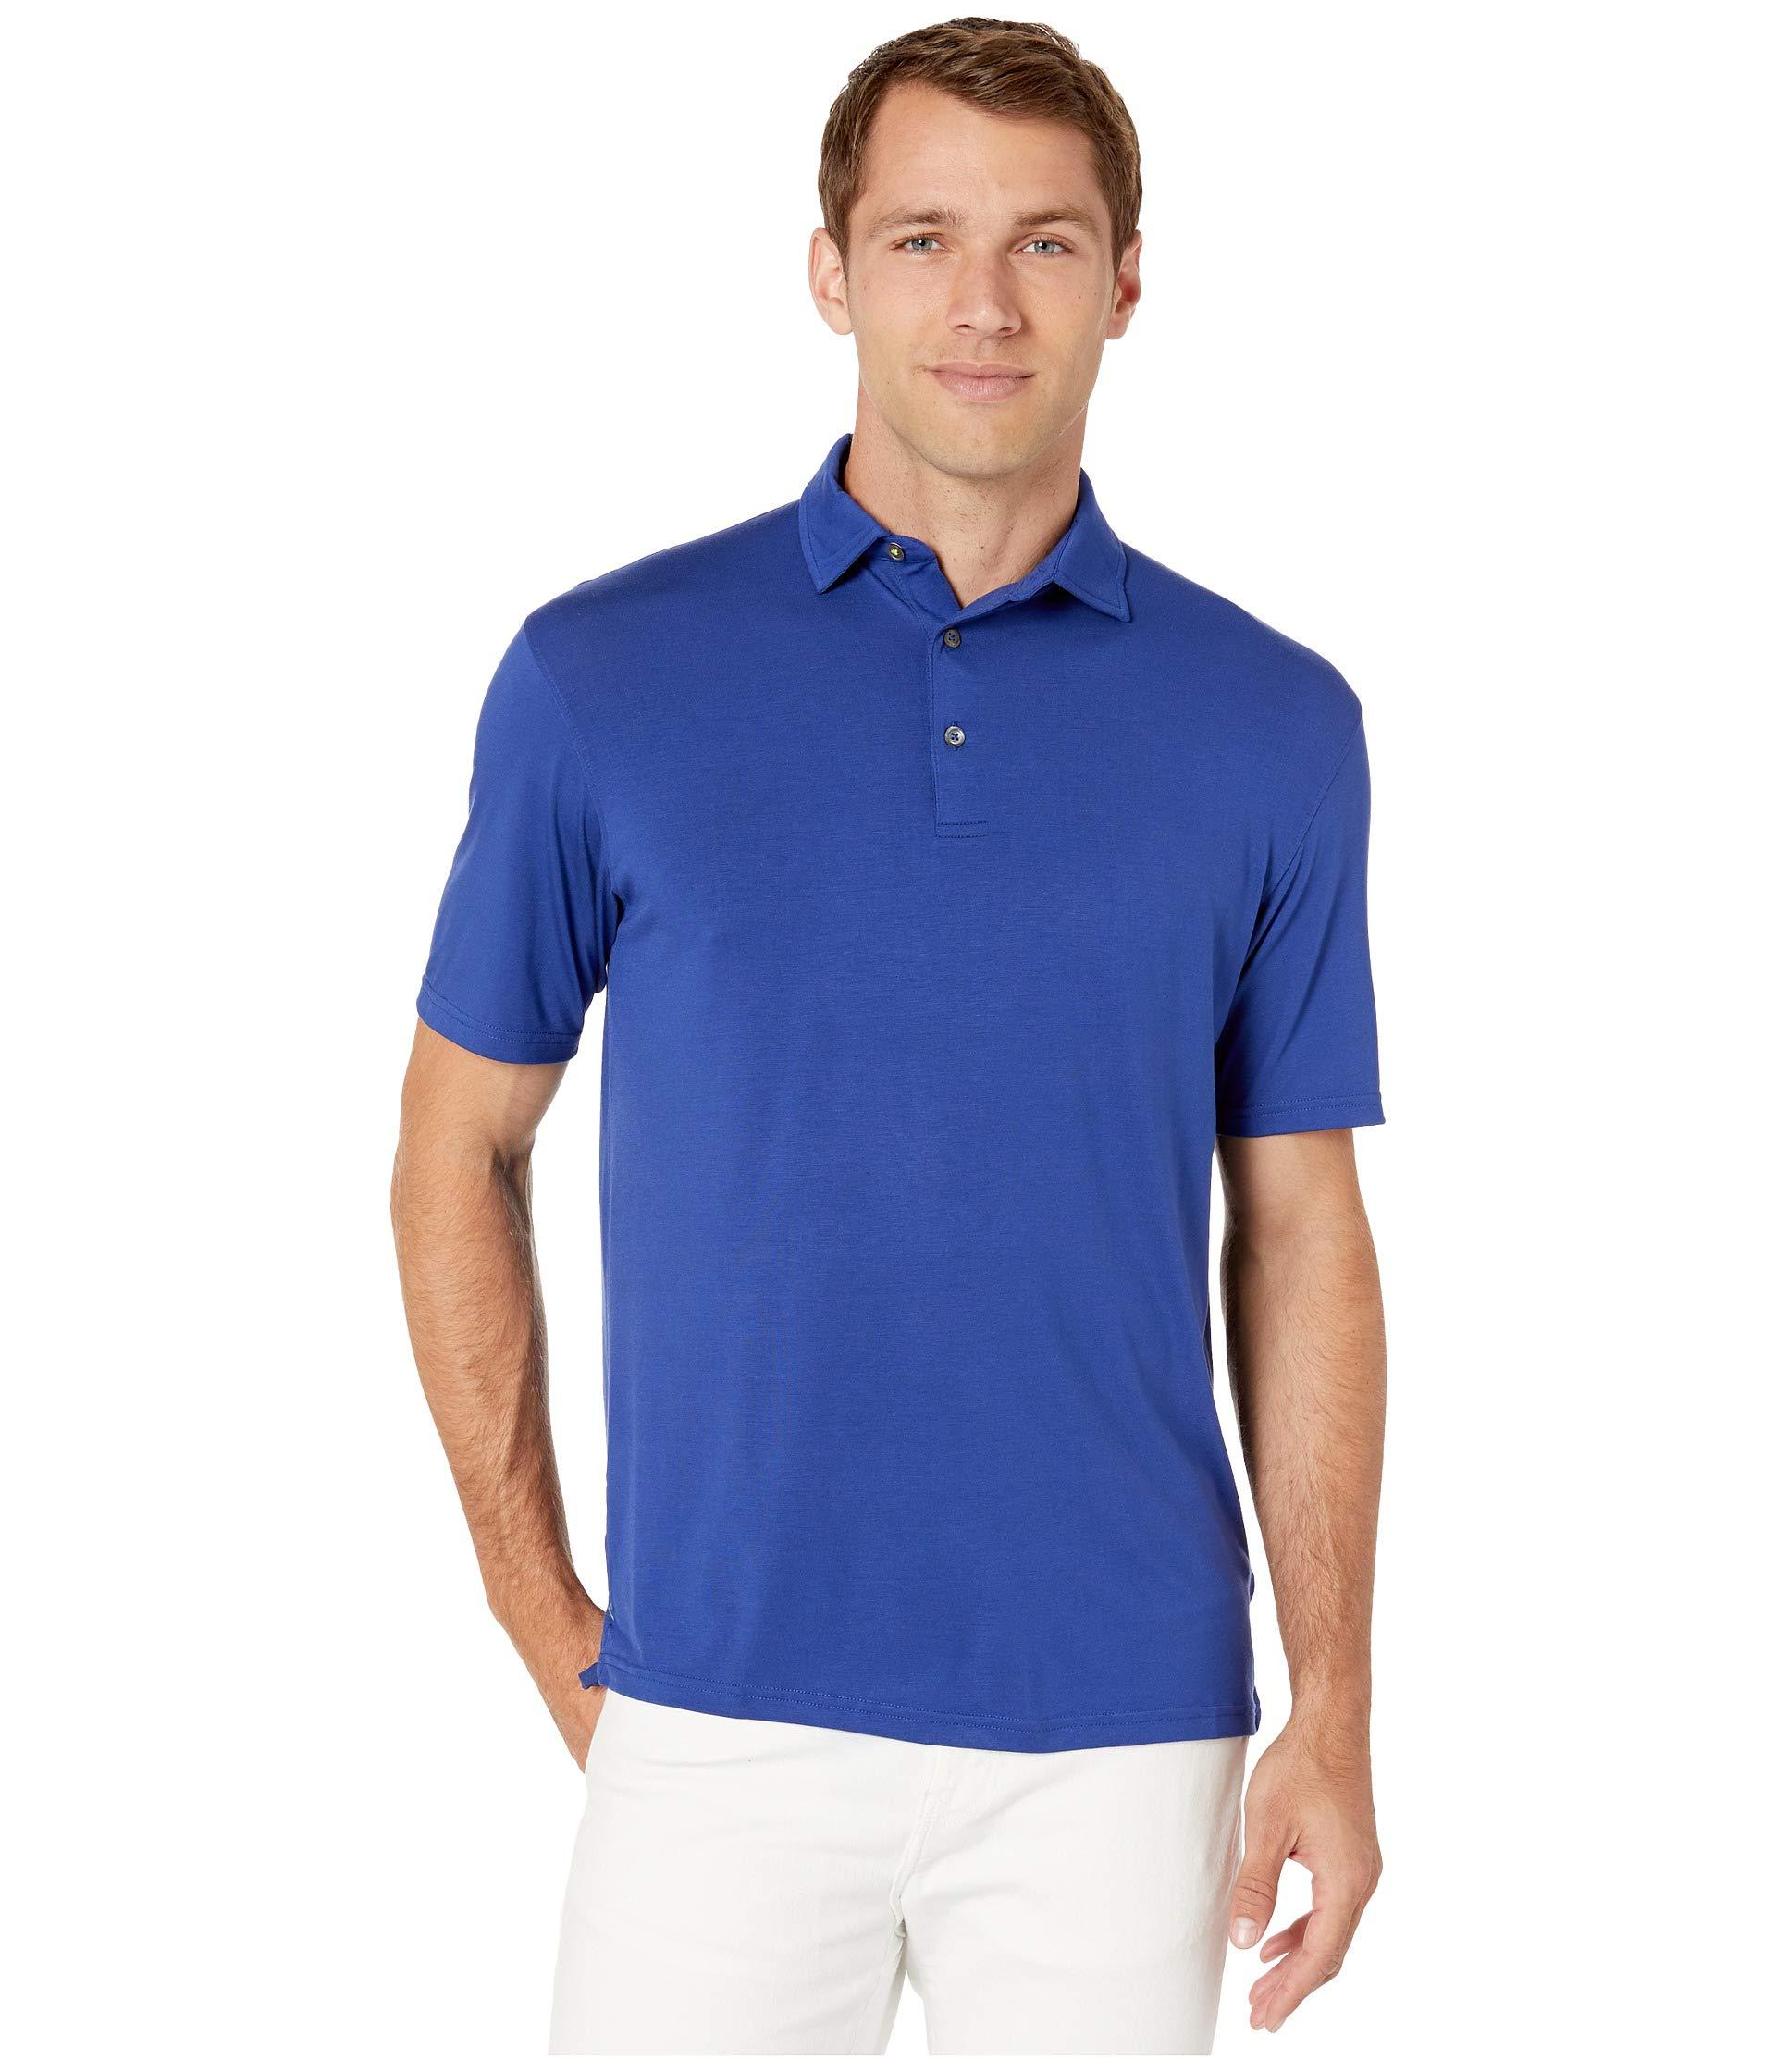 tasc Performance Synthetic Microair Element Polo in Blue for Men - Lyst